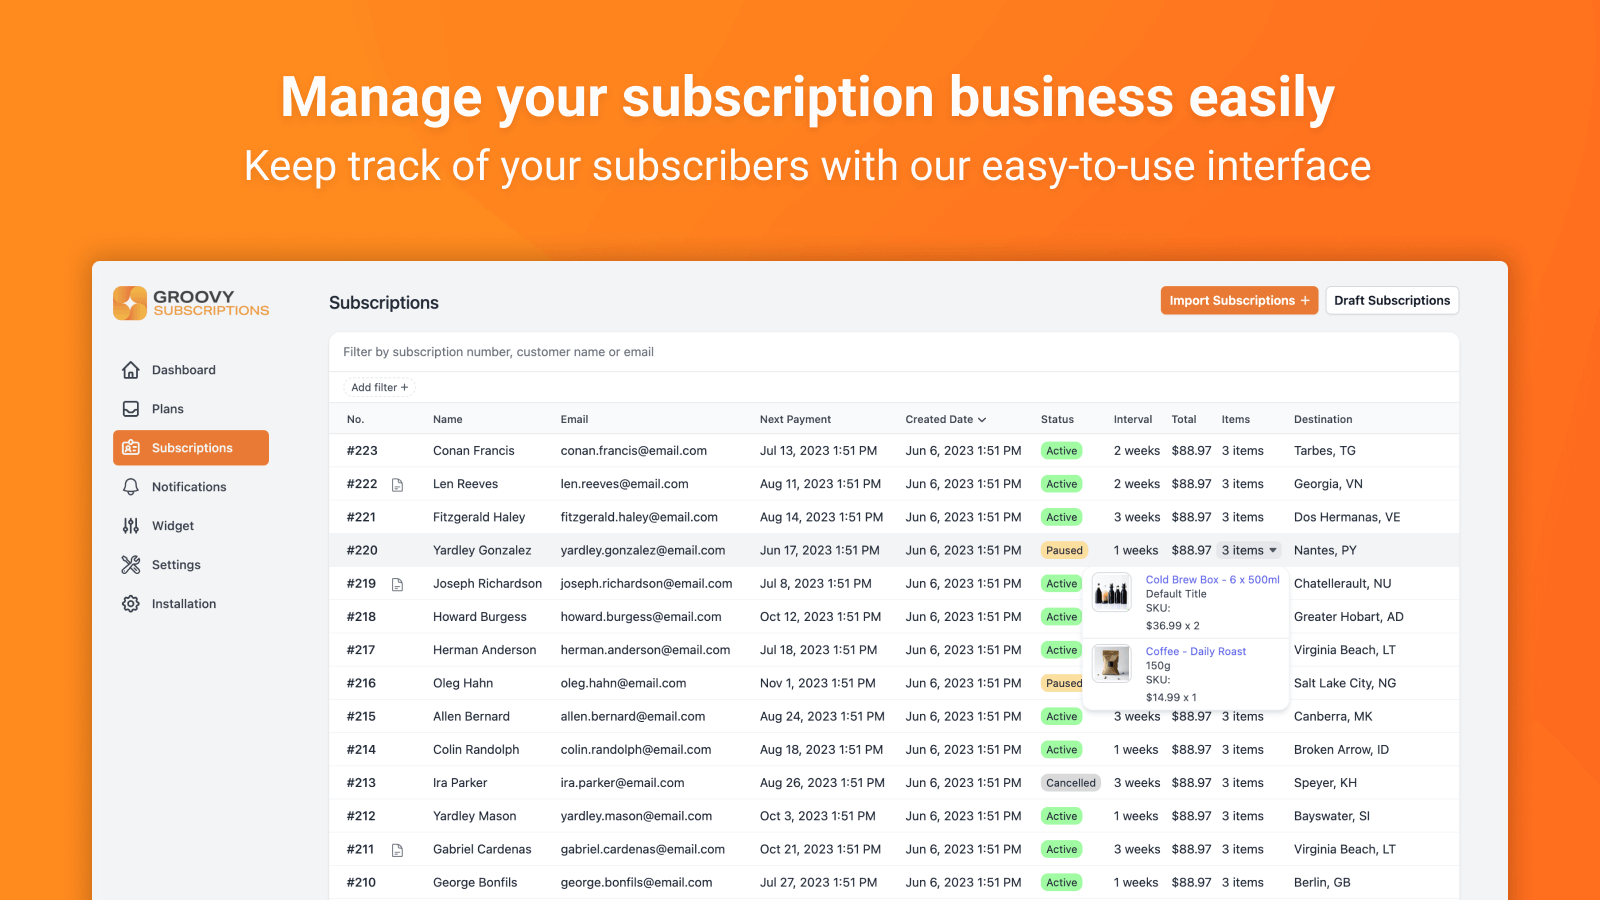 Manage your subscription business easily